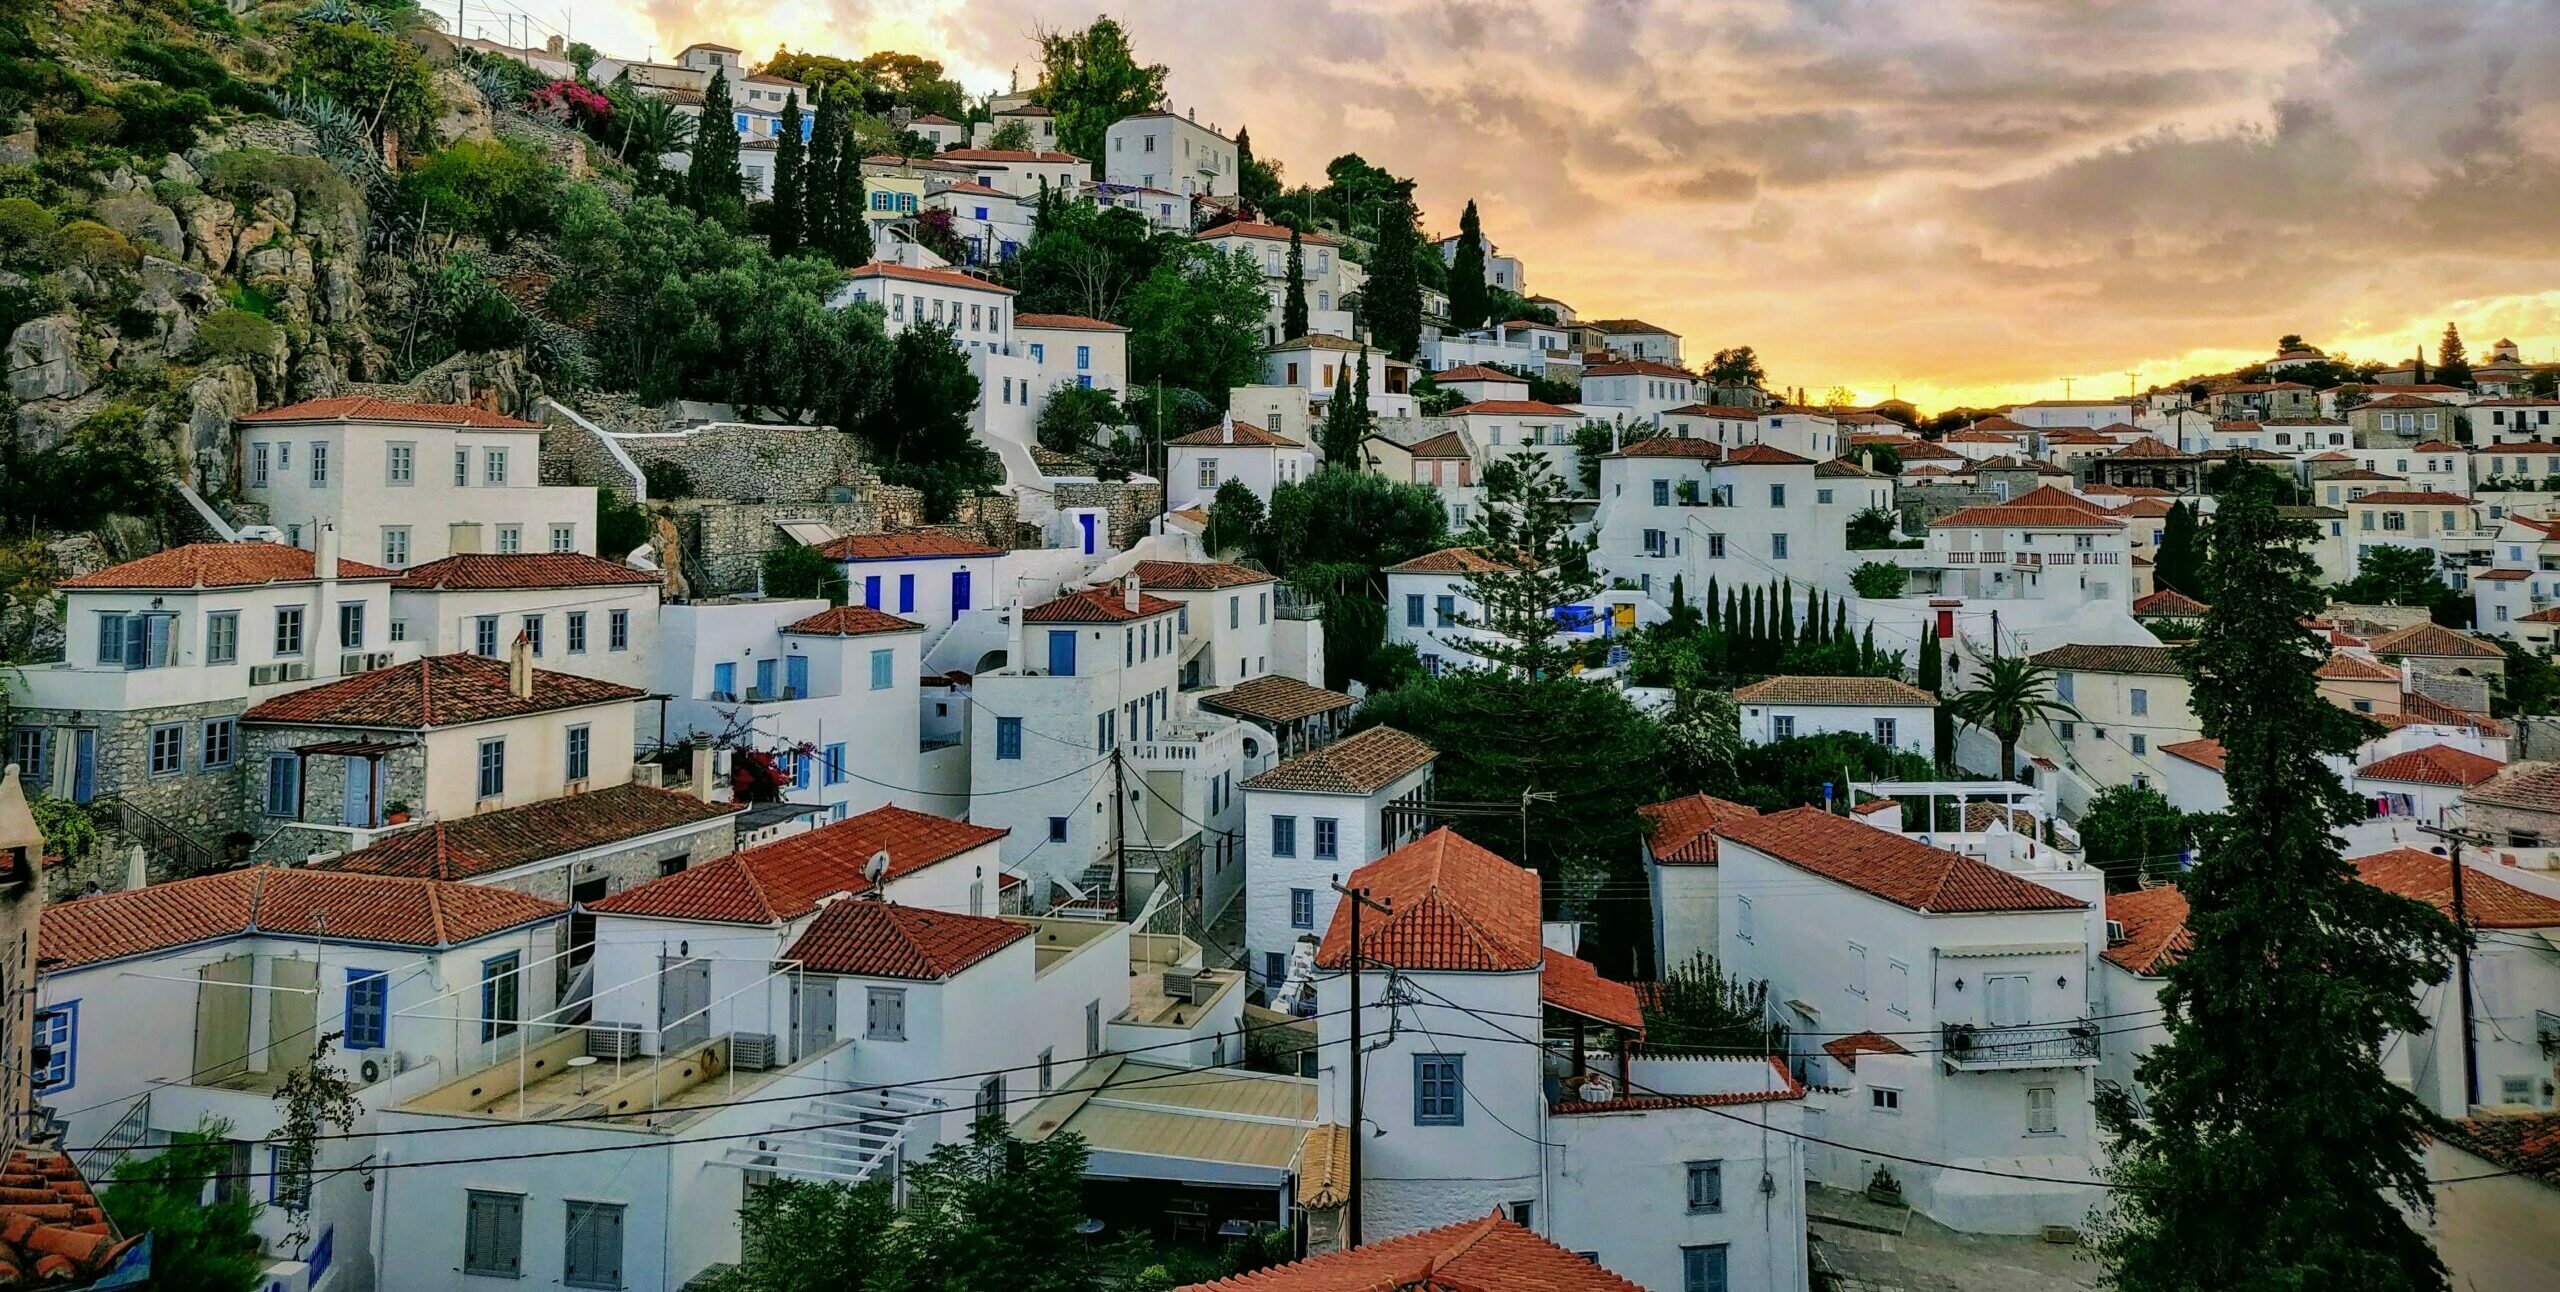 Hydra: The island worth going on an autumn weekend